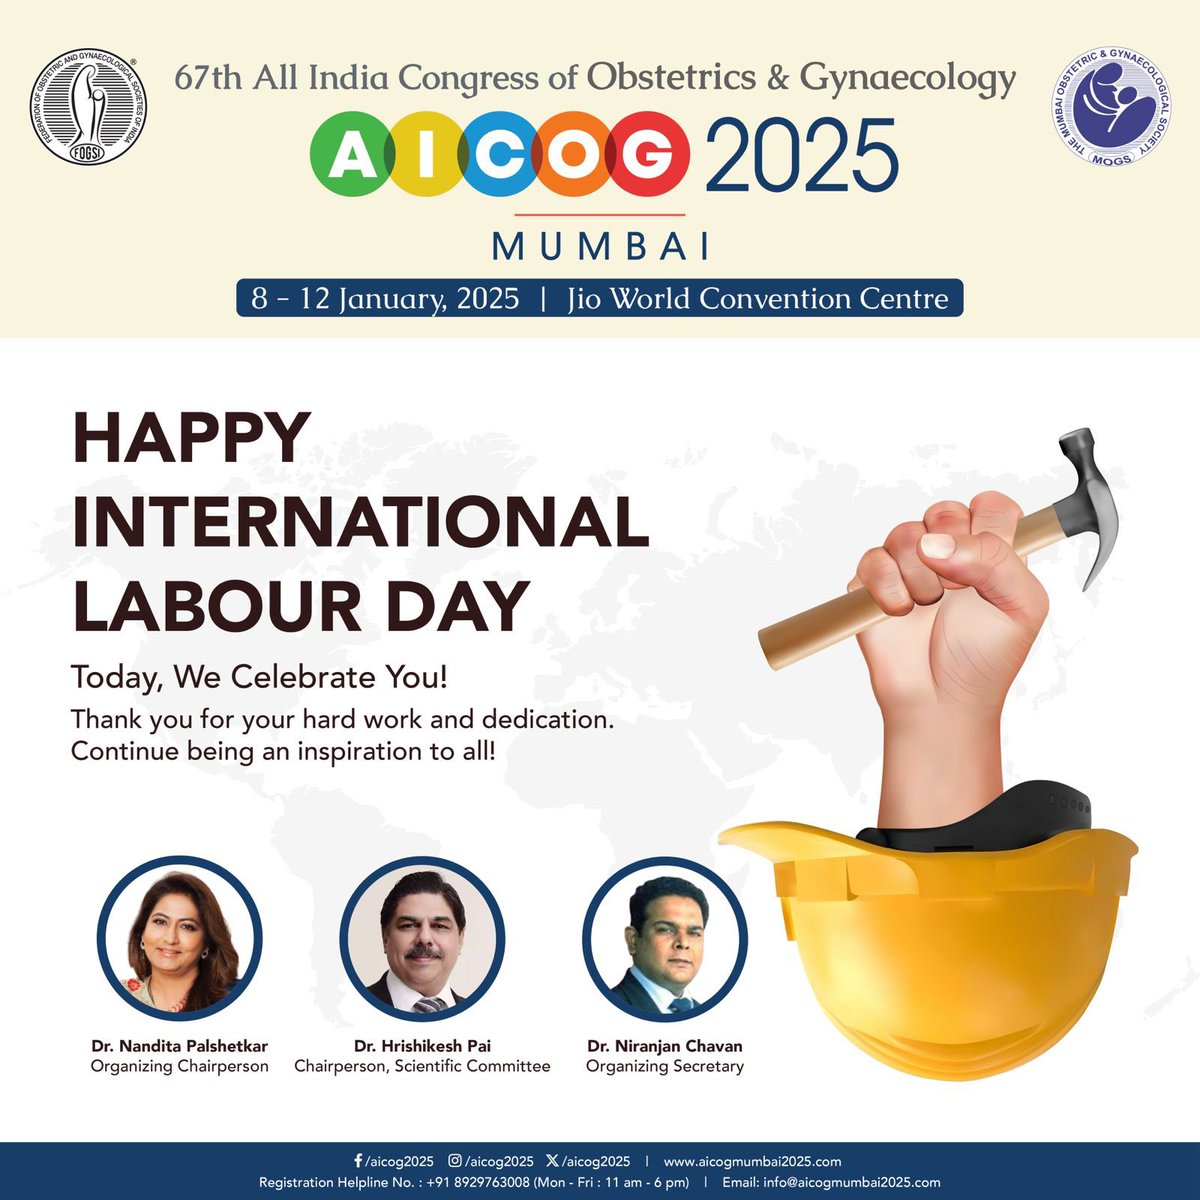 Happy International Labour Day!
Today, We Celebrate you thank you for your hard work and dedication Continue being an inspiration to all.

.
.
.
#labourday  #HealthyCommunity #AICOG2025 #gynaecology #obstetrics #ConferenceExcitement #countdownbegins #medivisionevents